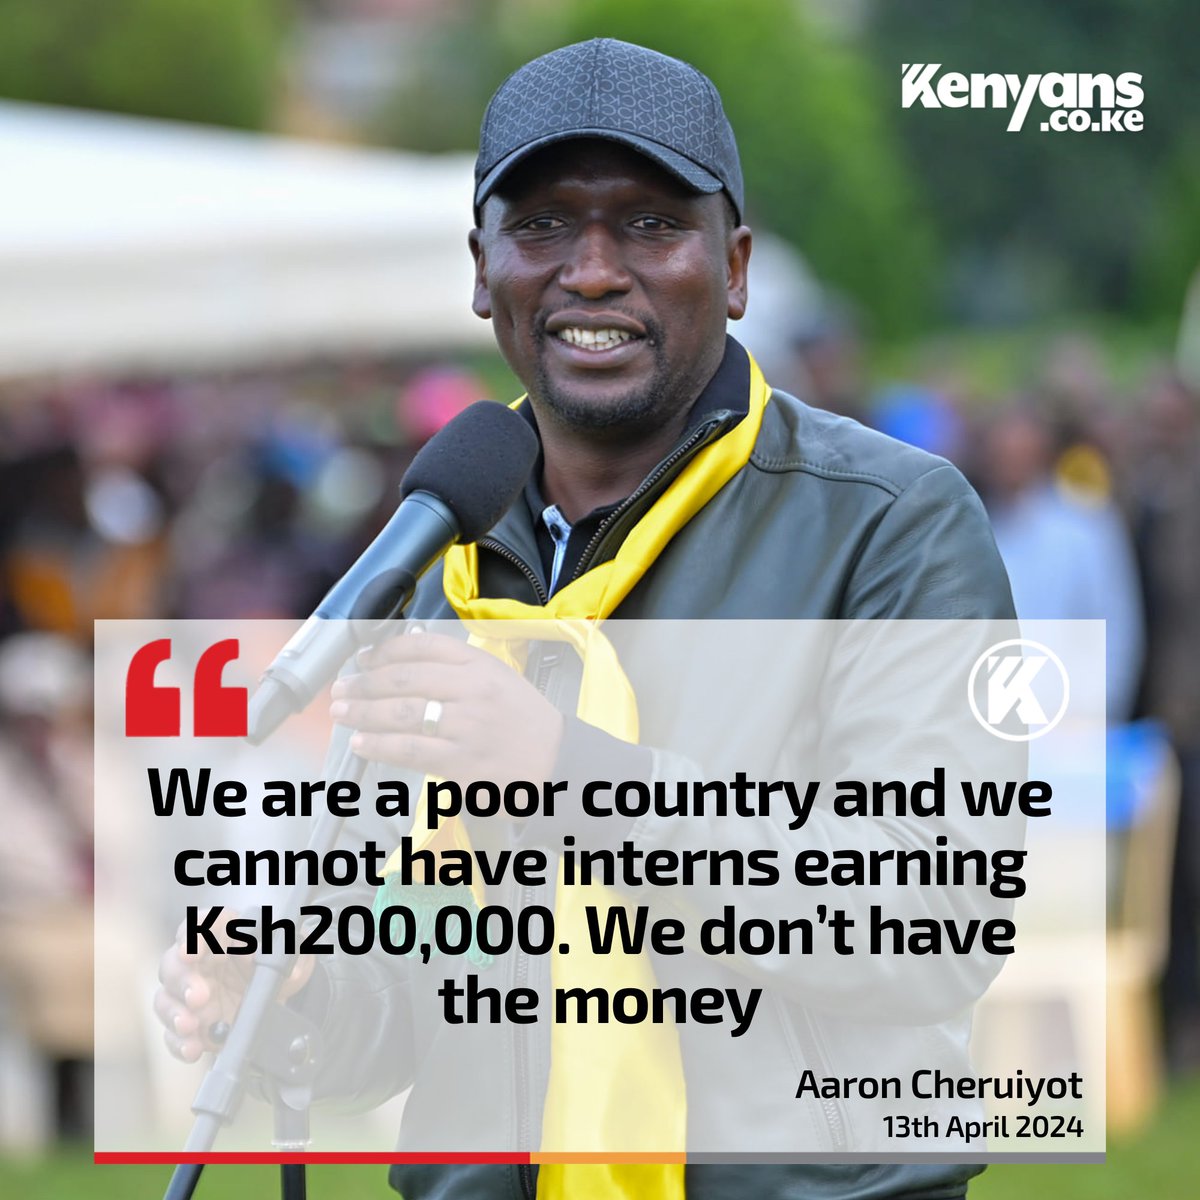 Huh! @Aaroncheruiyot how much do you earn? Pls share your payslip we see if a poor country can afford your pay. Sometimes being quiet hides stupidity 😞